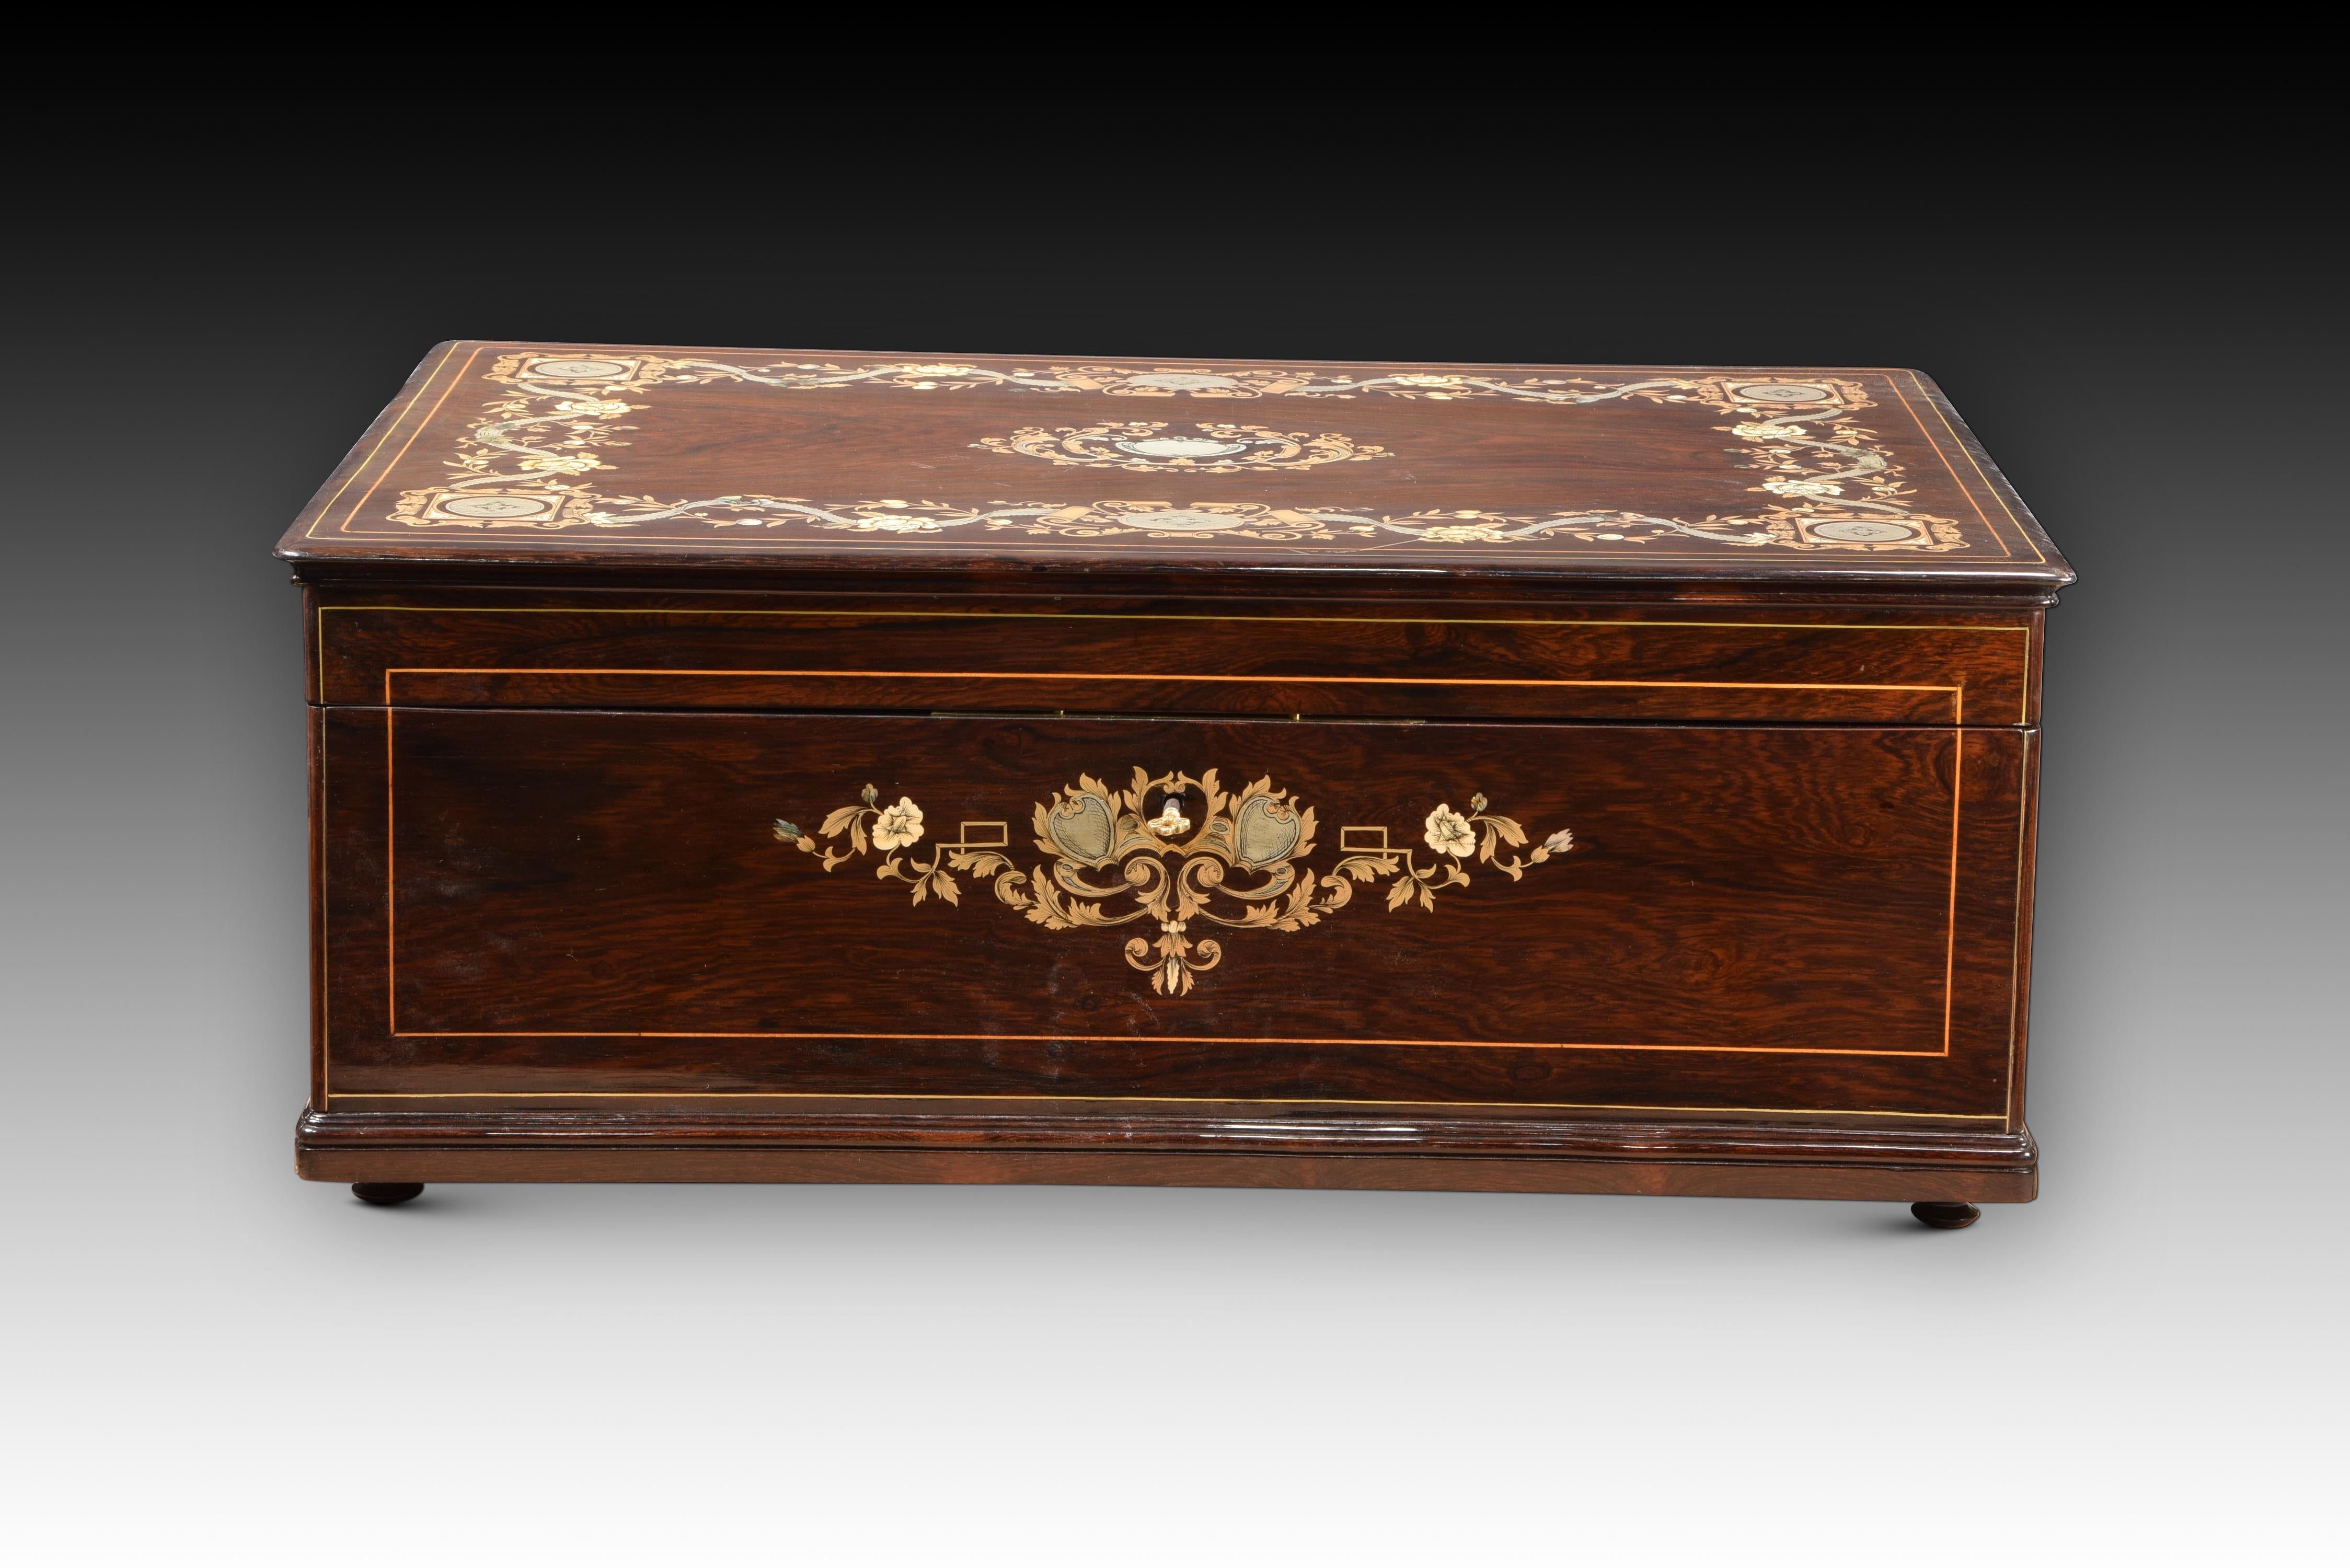 Napoleon III box. Marquetry. France, 19th century. 
Rectangular wooden box with a flat top and supported on circular legs that presents a front opening with a key lock and a hinged hinged top lid. Inside, there is a flat horizontal space with the